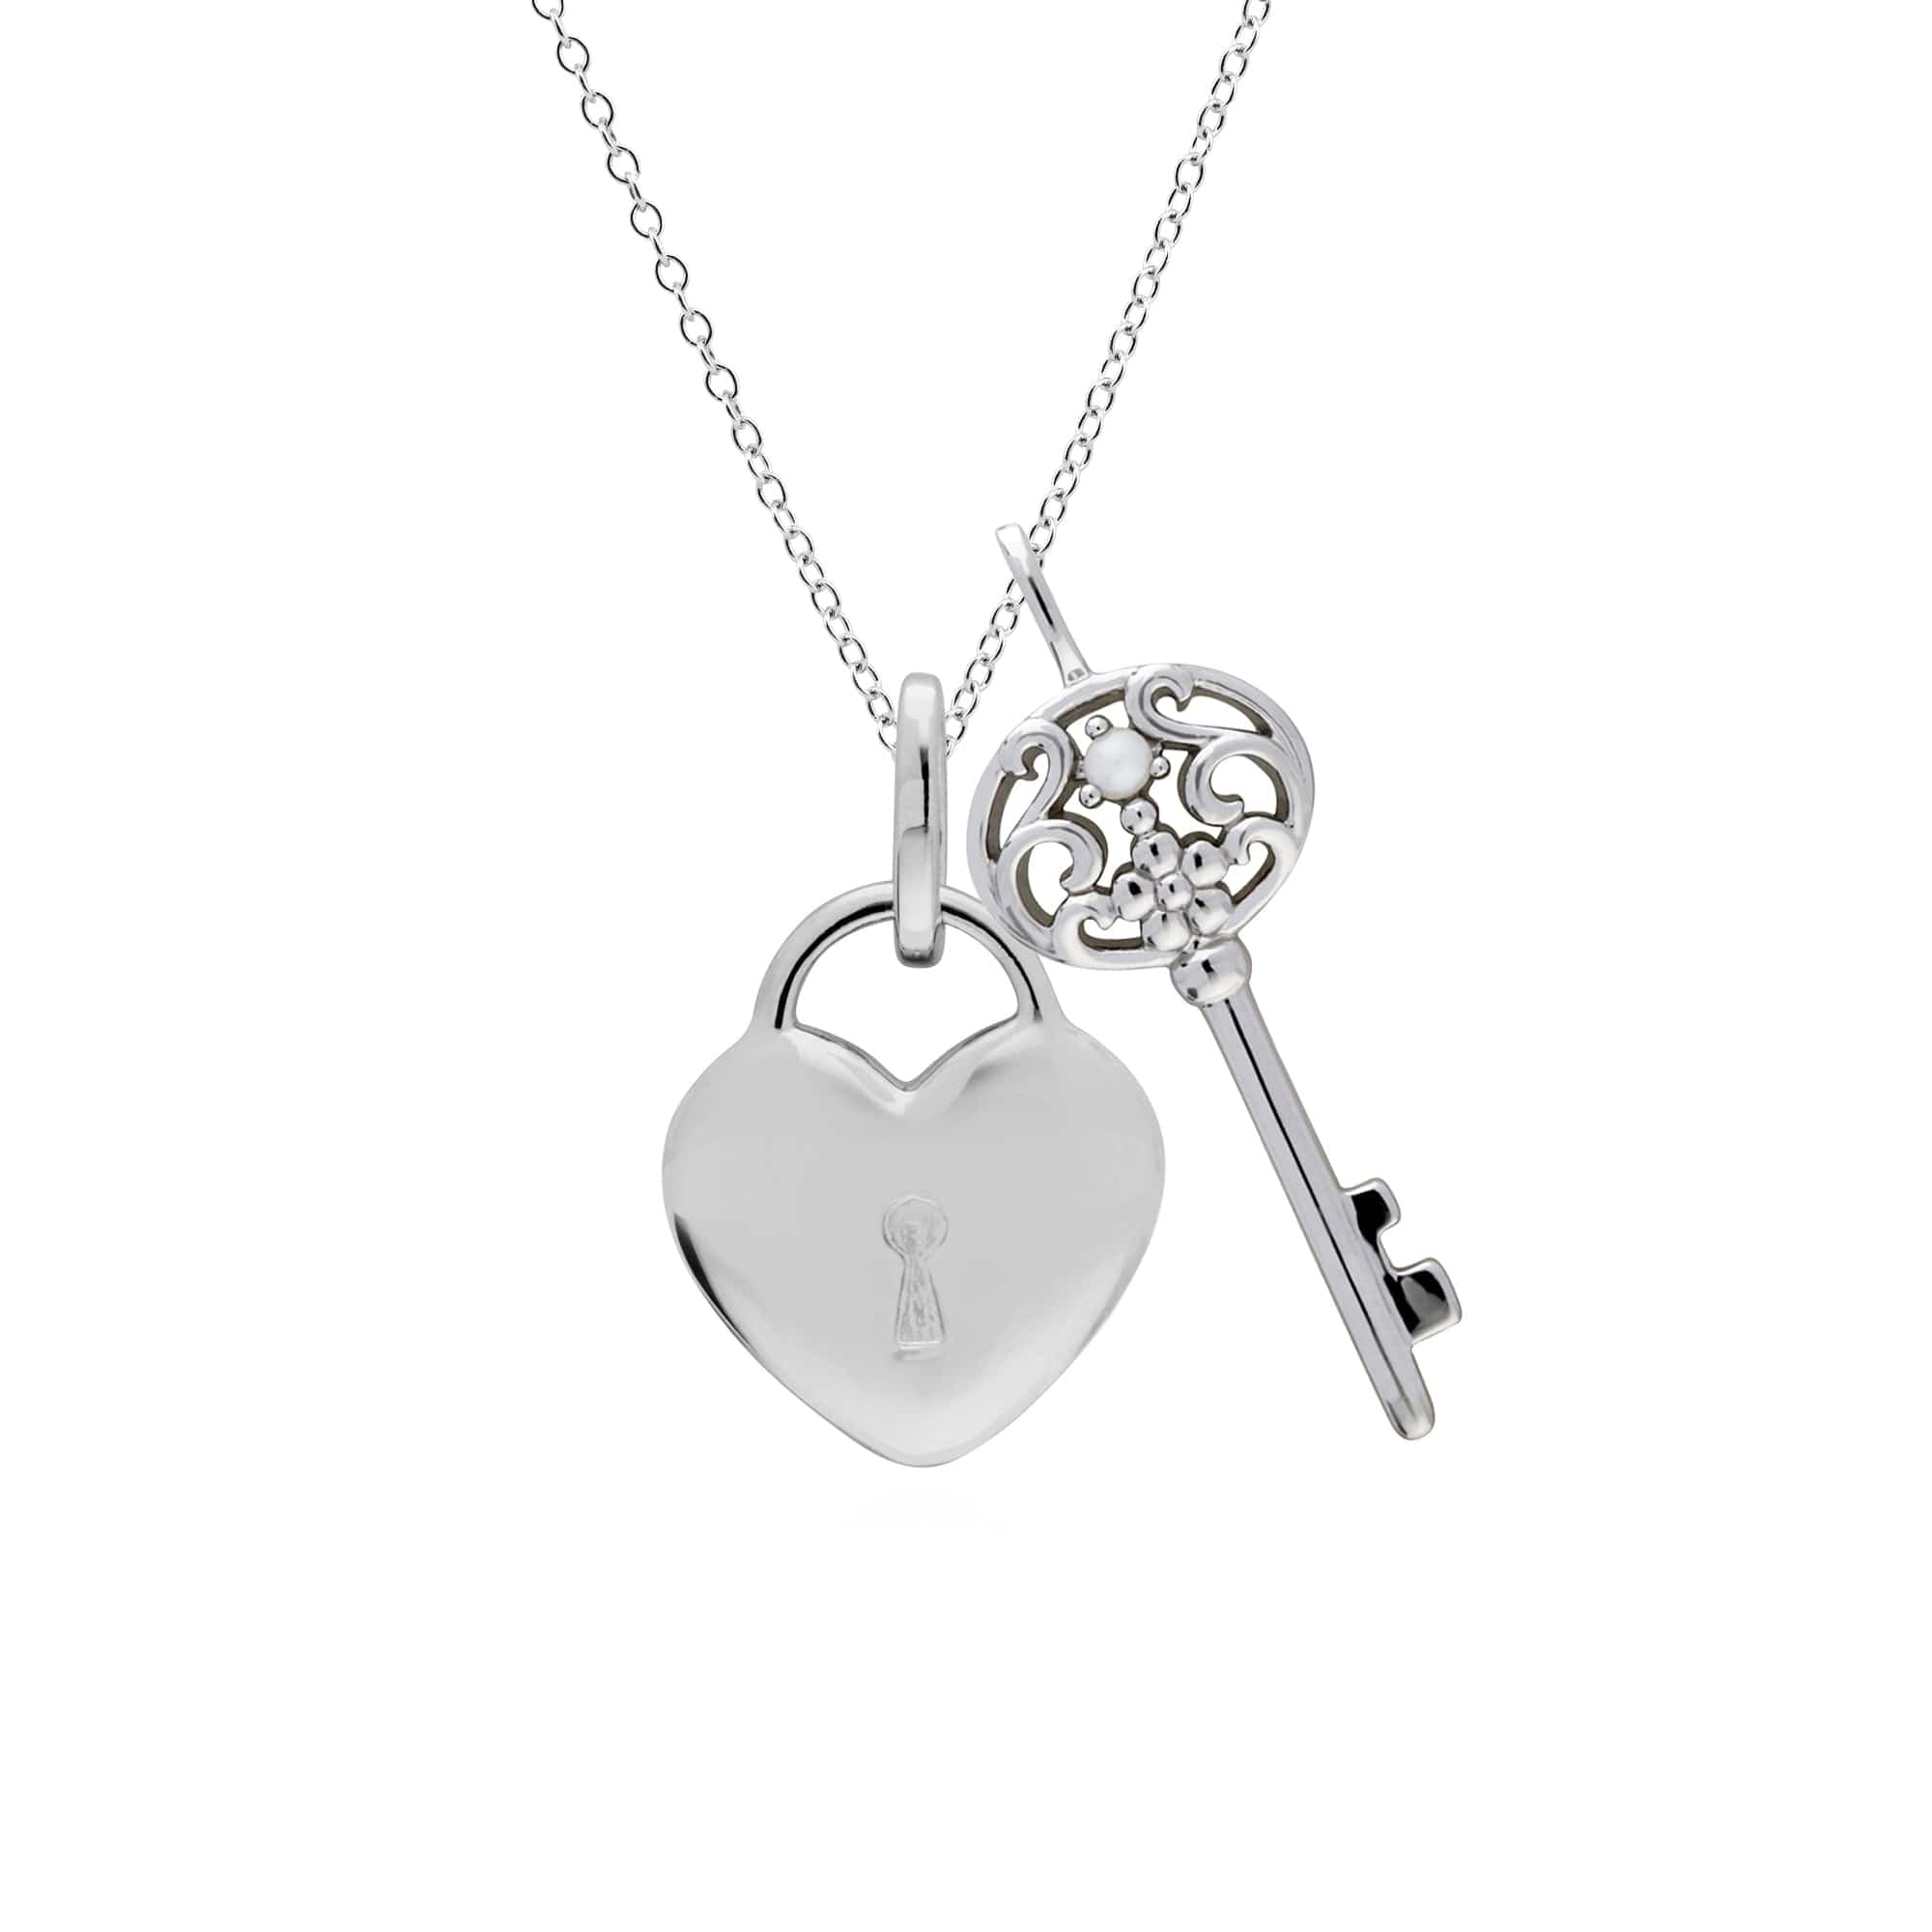 270P026201925-270P027001925 Classic Heart Lock Pendant & Pearl Big Key Charm in 925 Sterling Silver 1